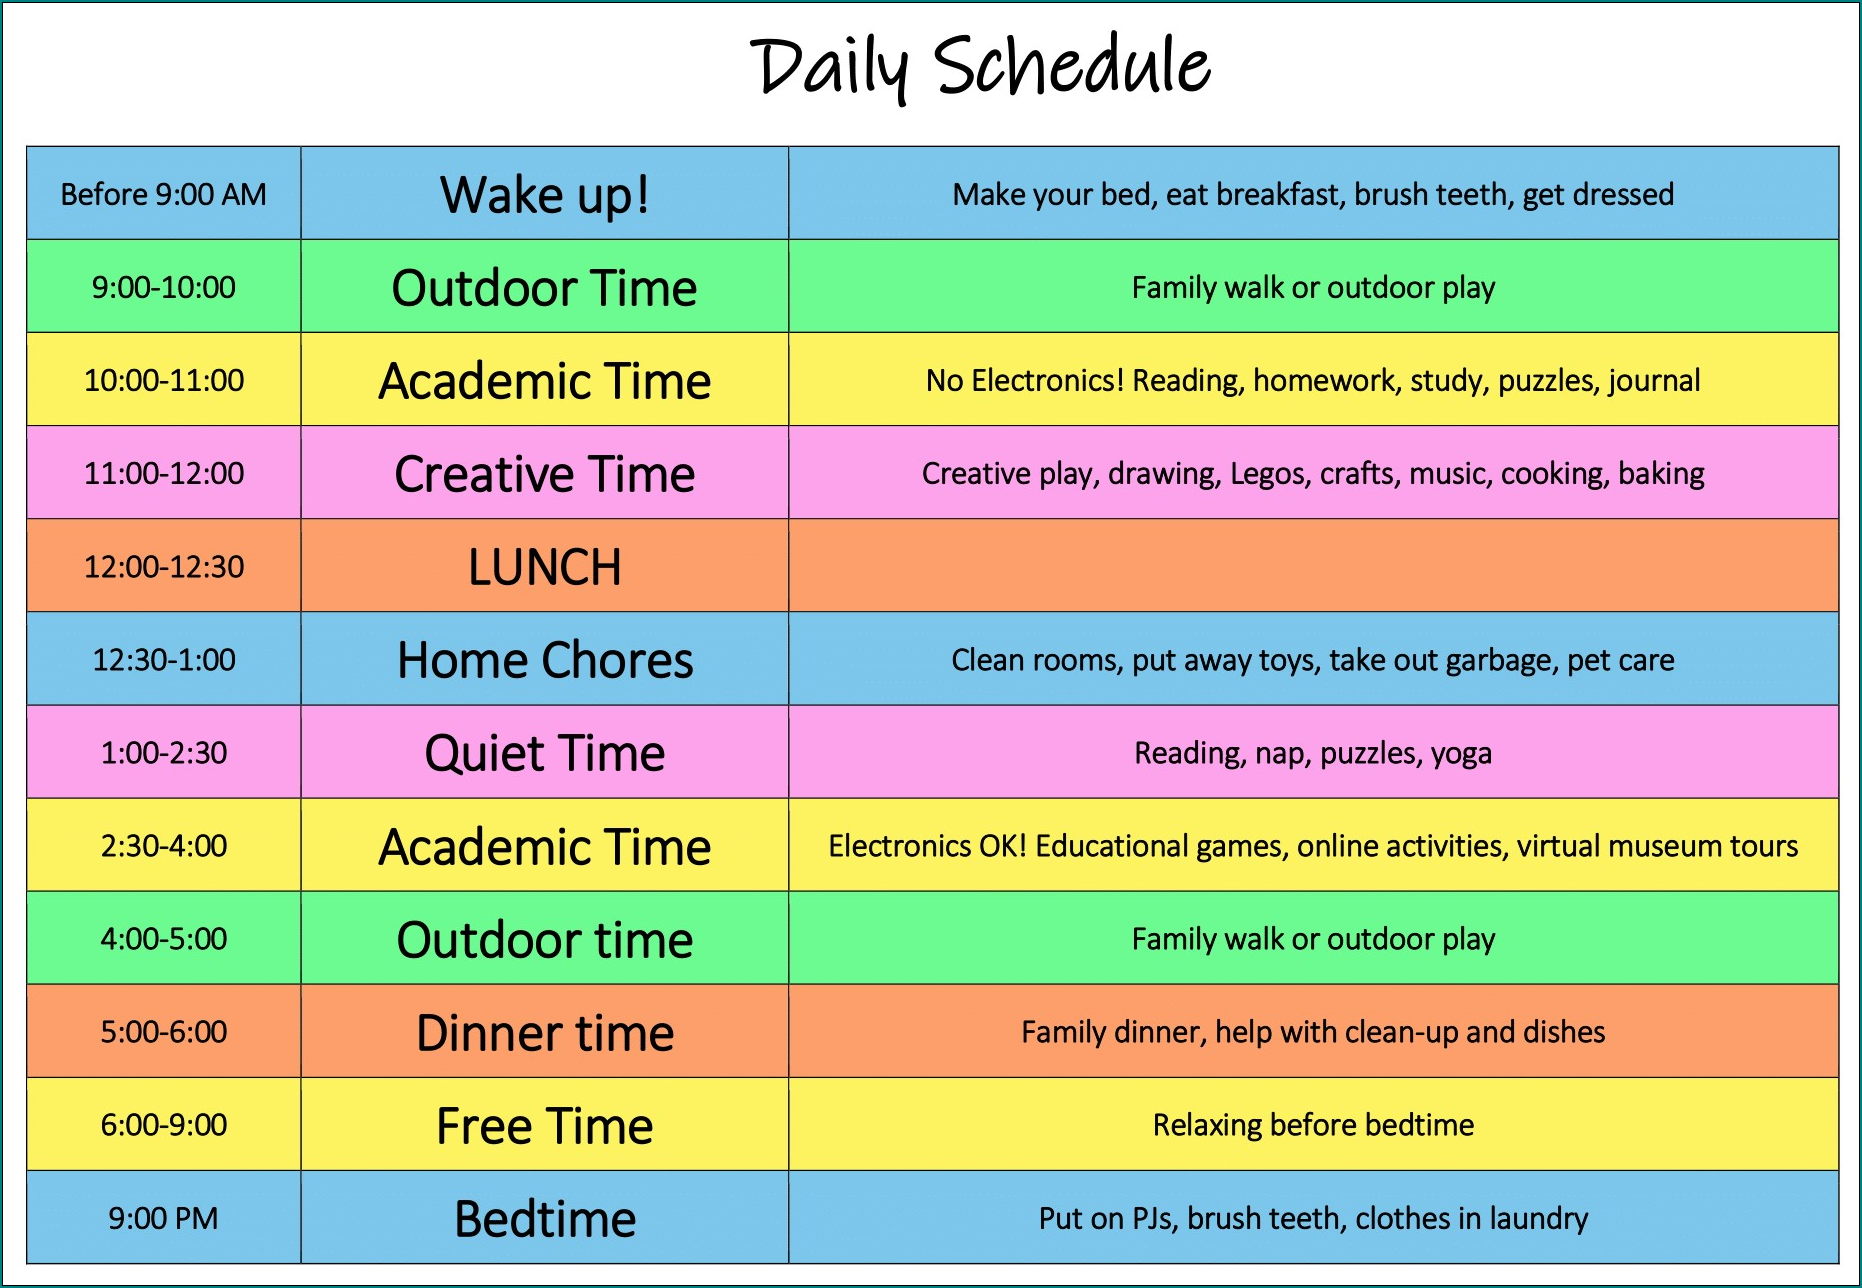 Sample of Word Daily Schedule Template